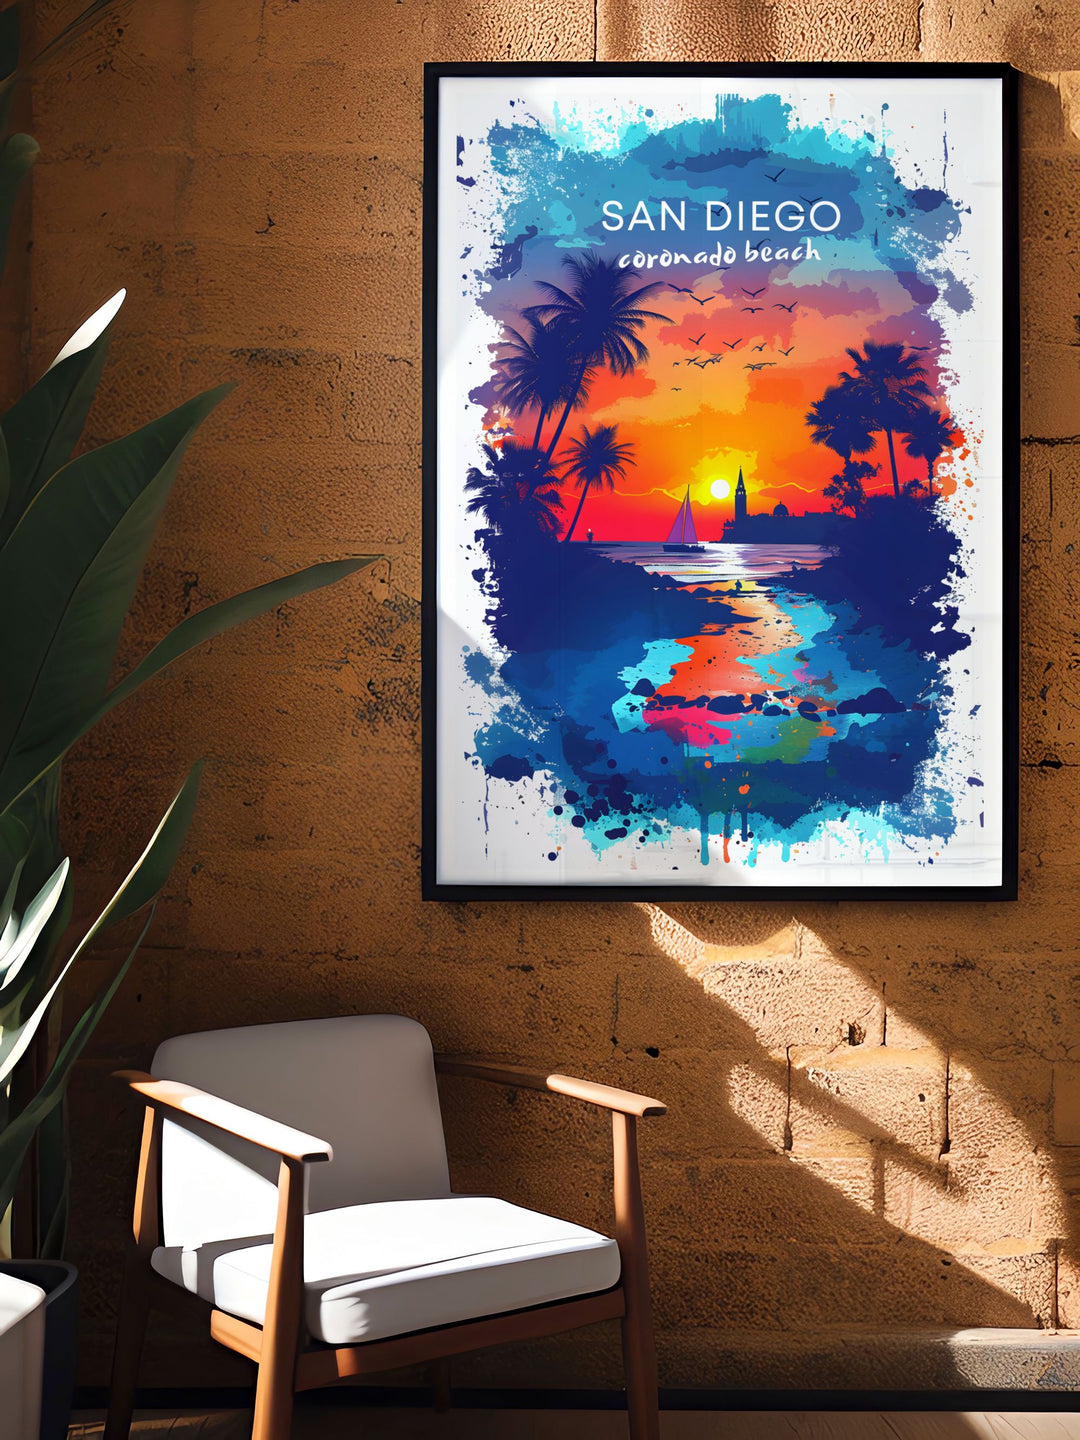 Our Vail Ski Wall Art and Sunset Posters are designed to elevate your home decor. These stunning pieces of Colorado Art capture the excitement of skiing and the tranquil beauty of a Sunset adding a sophisticated touch to any space.